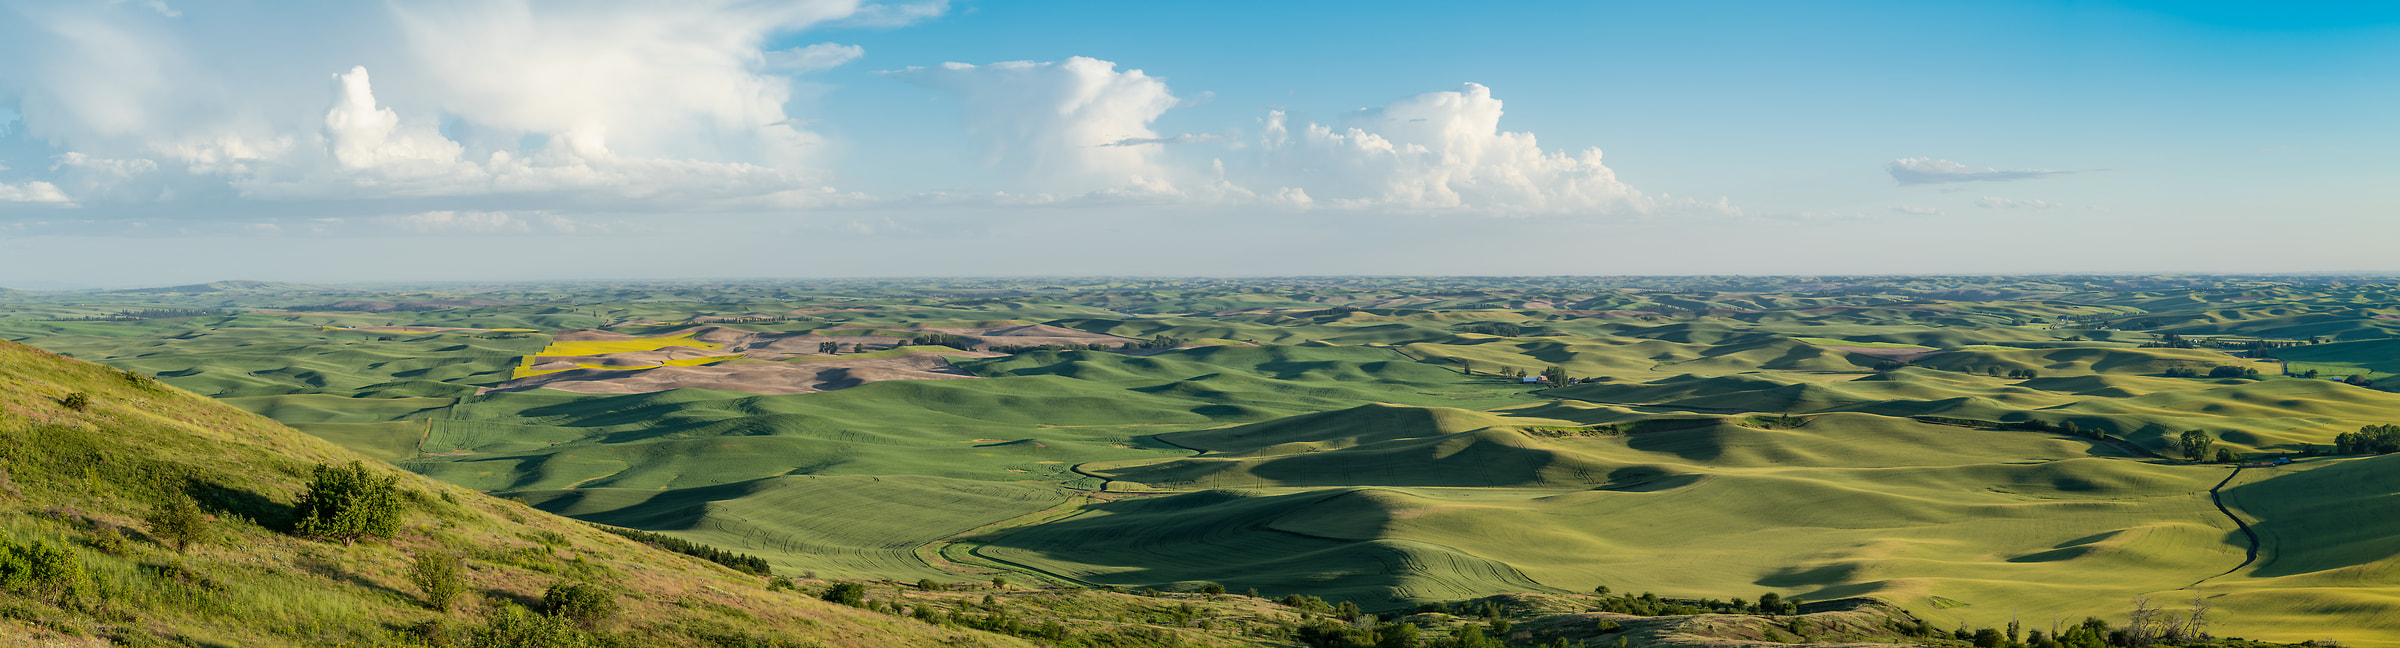 415 megapixels! A very high resolution, large-format VAST photo print of green rolling hills and a blue sky with clouds; landscape photograph created by Greg Probst in Steptoe Butte State Park, Washington.